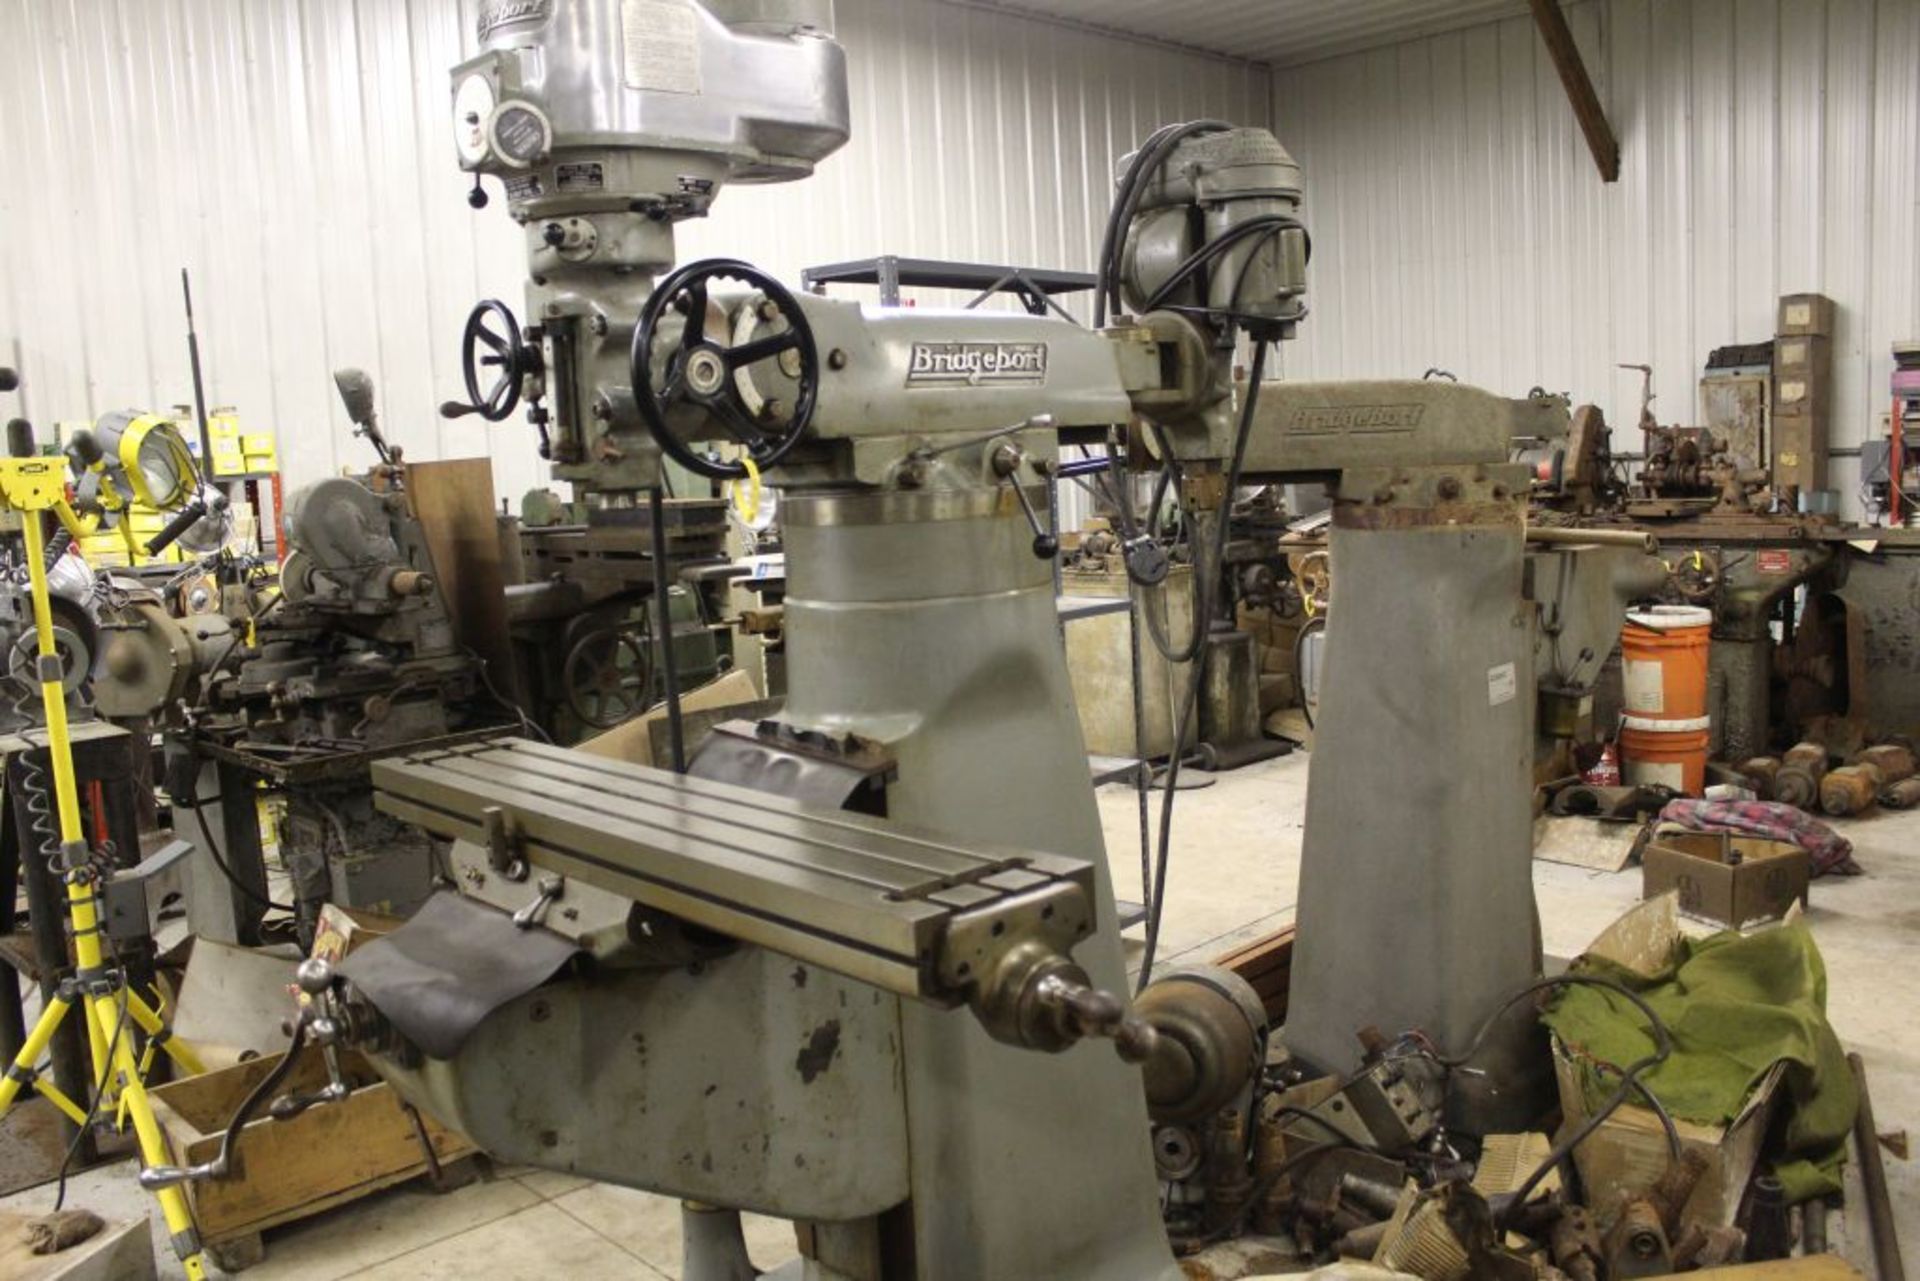 Bridgeport mill, model 12-BR, sn 83978, 9" x 48" bed, manual (not down power), shaping attachment. - Image 3 of 15